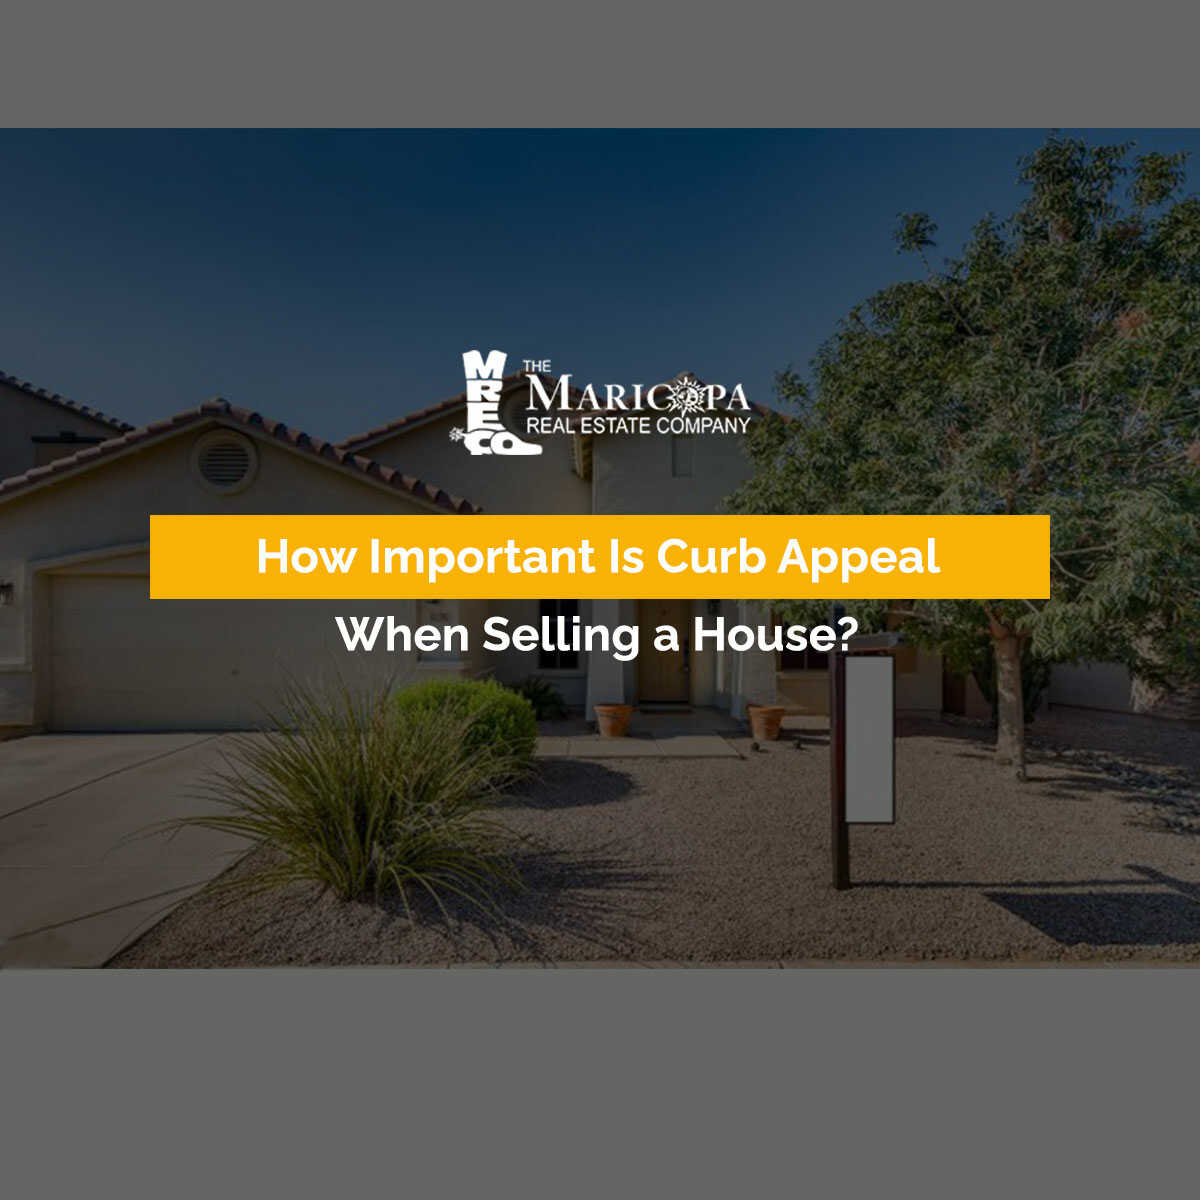 How Important Is Curb Appeal When Selling a House?